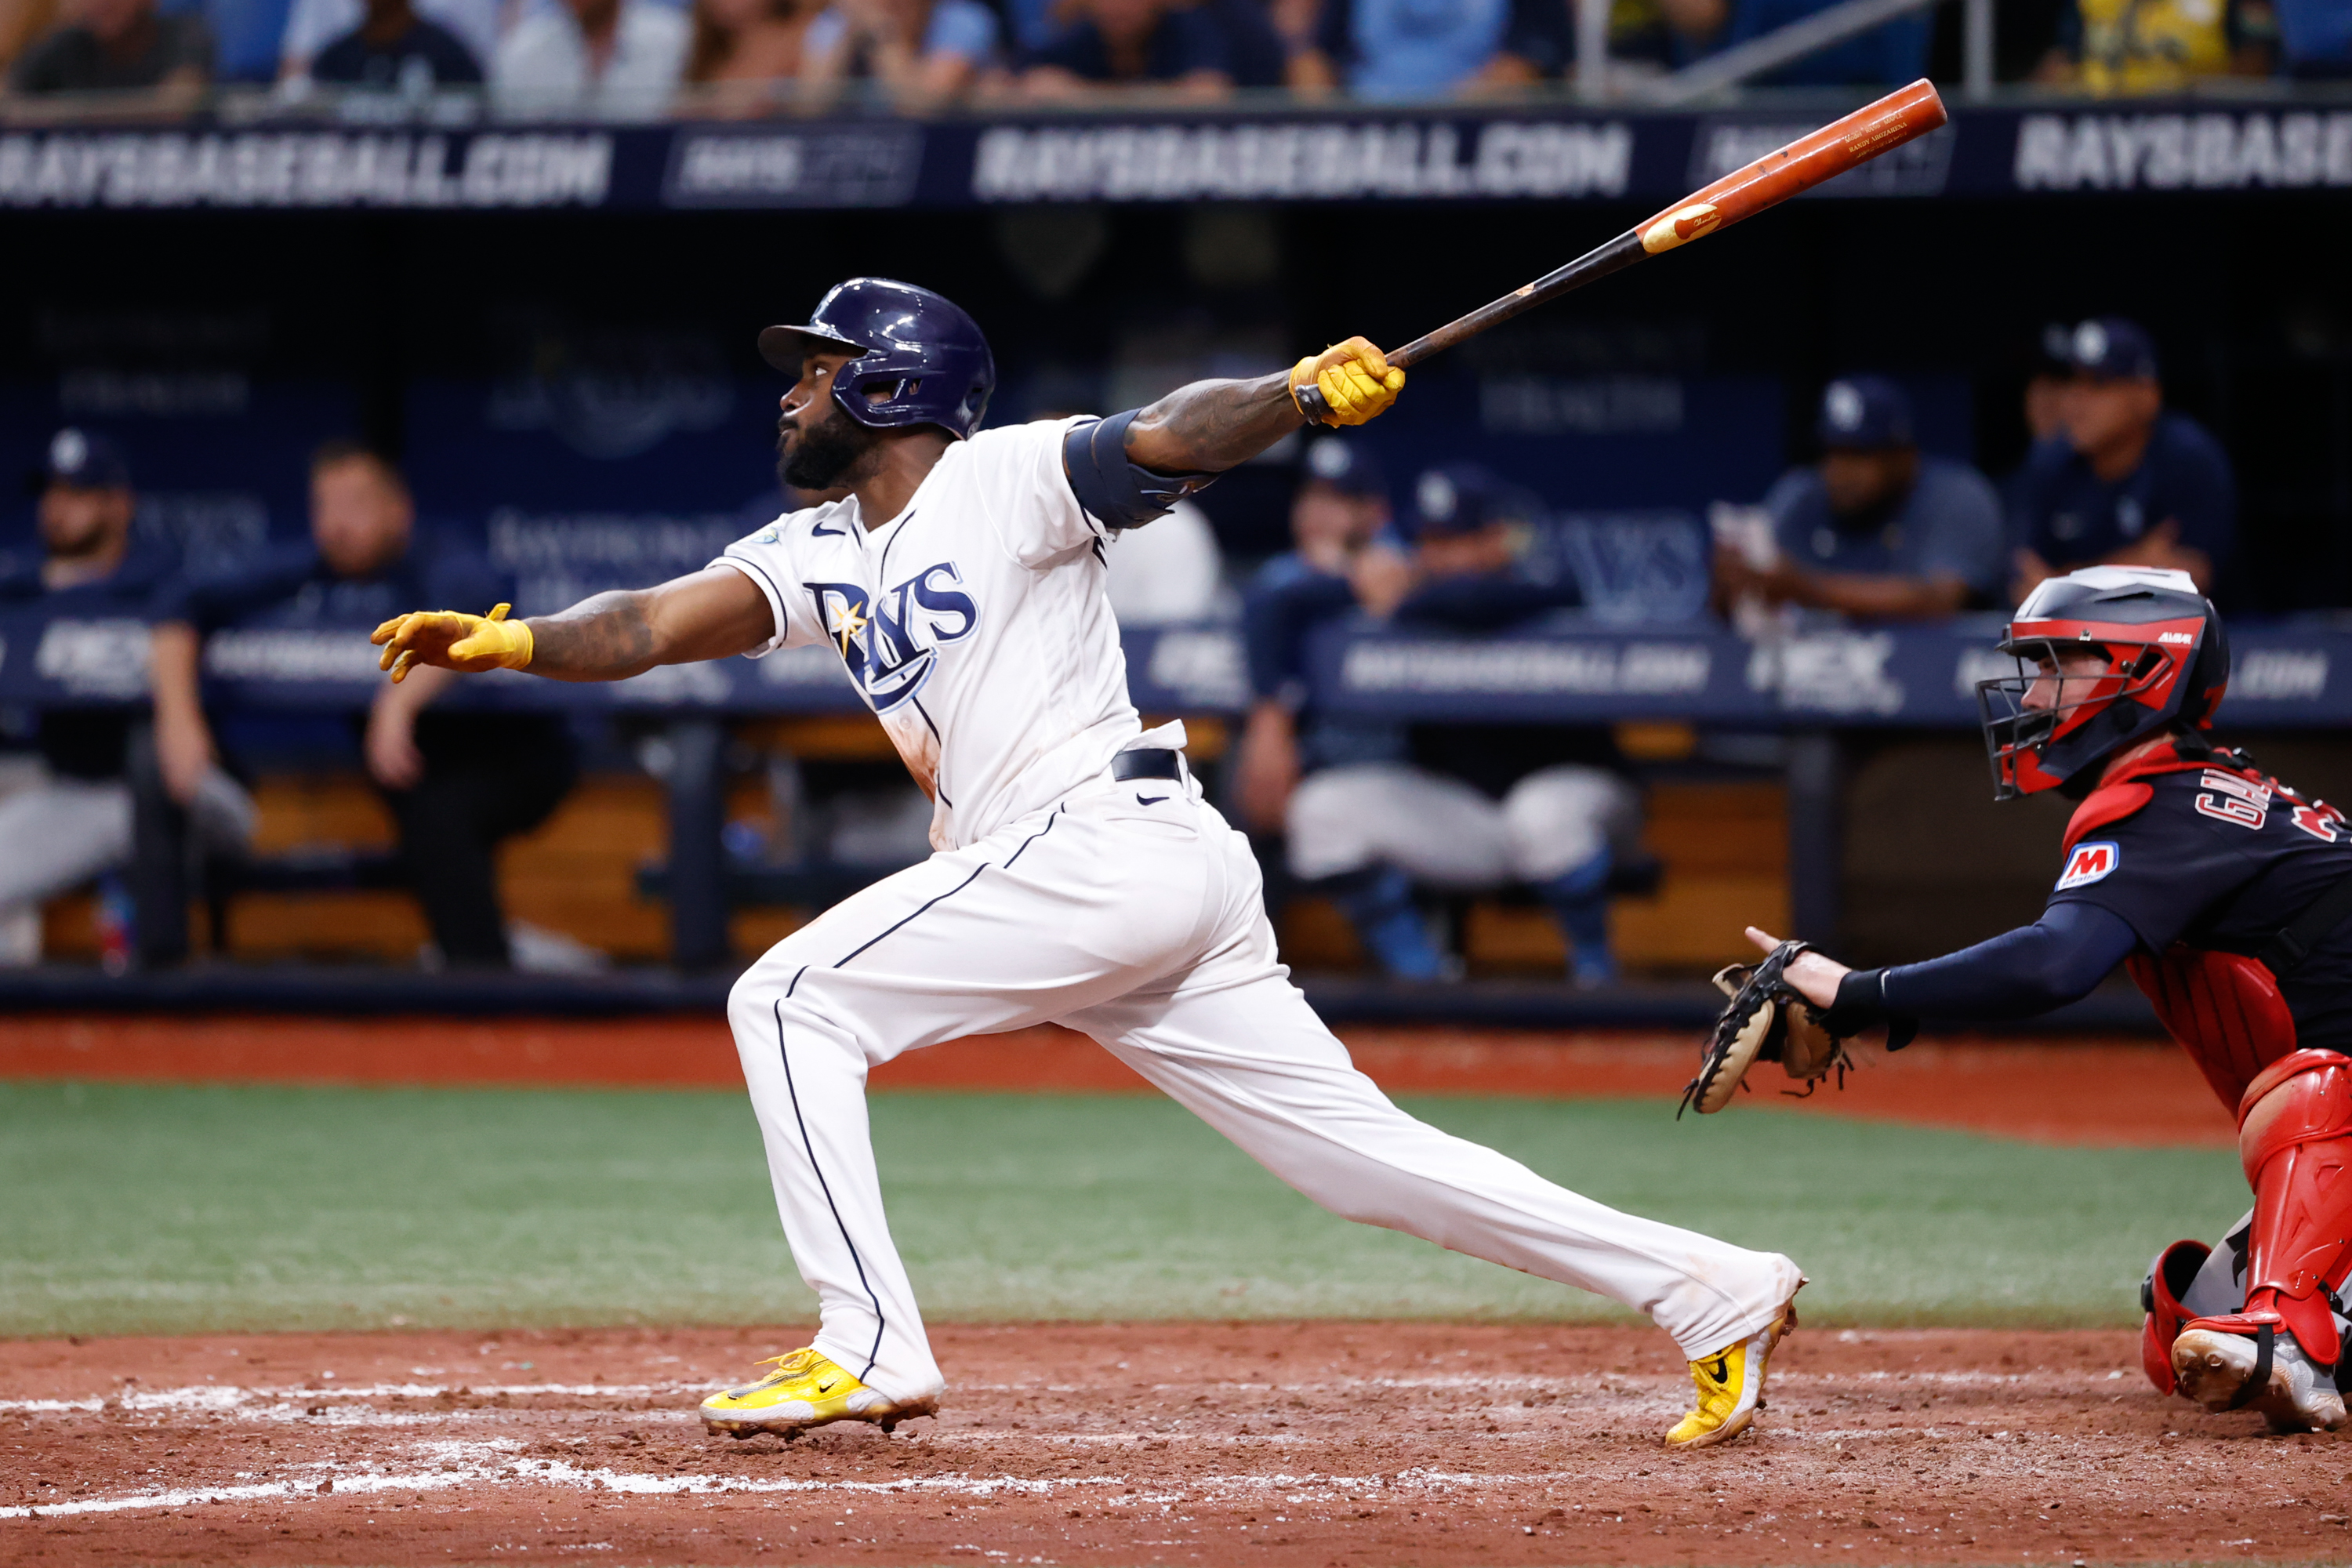 Rays win: Arozarena completes three-run ninth as Rays rally to beat the  Guardians 6-5